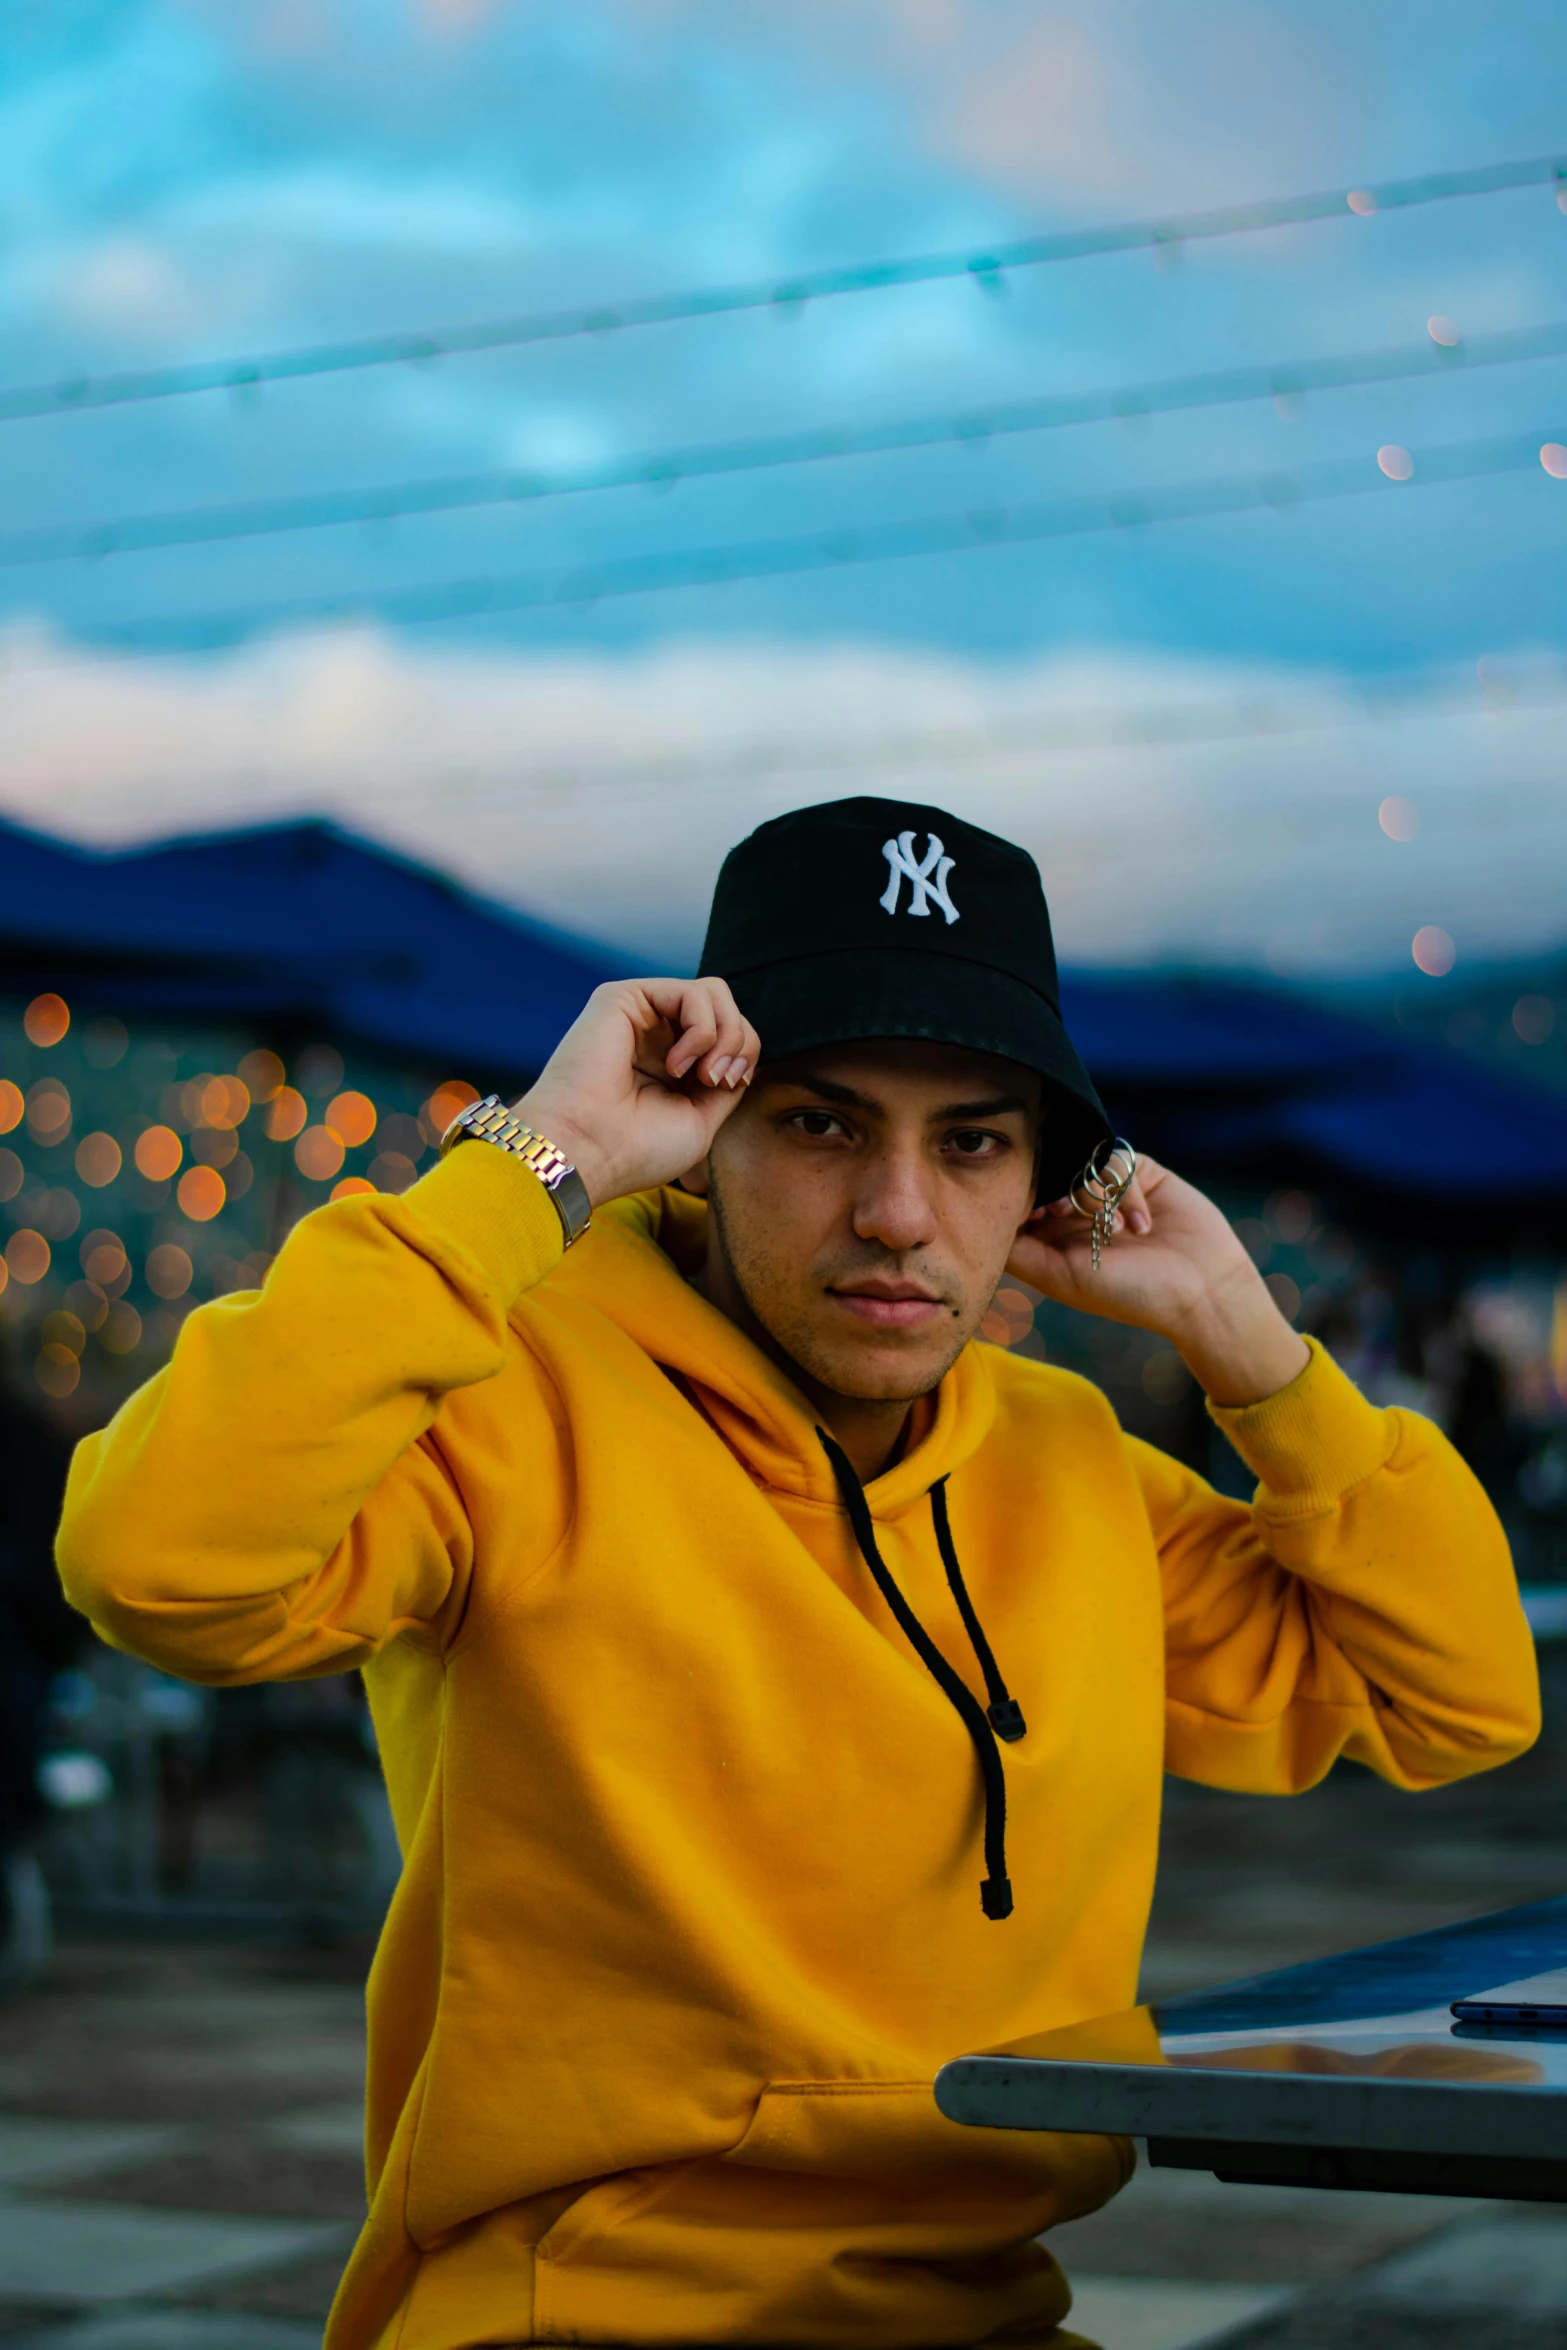 a man in a yellow hoodie sitting at a table, an album cover, unsplash, wearing baseball cap, confident pose, night setting, asher duran